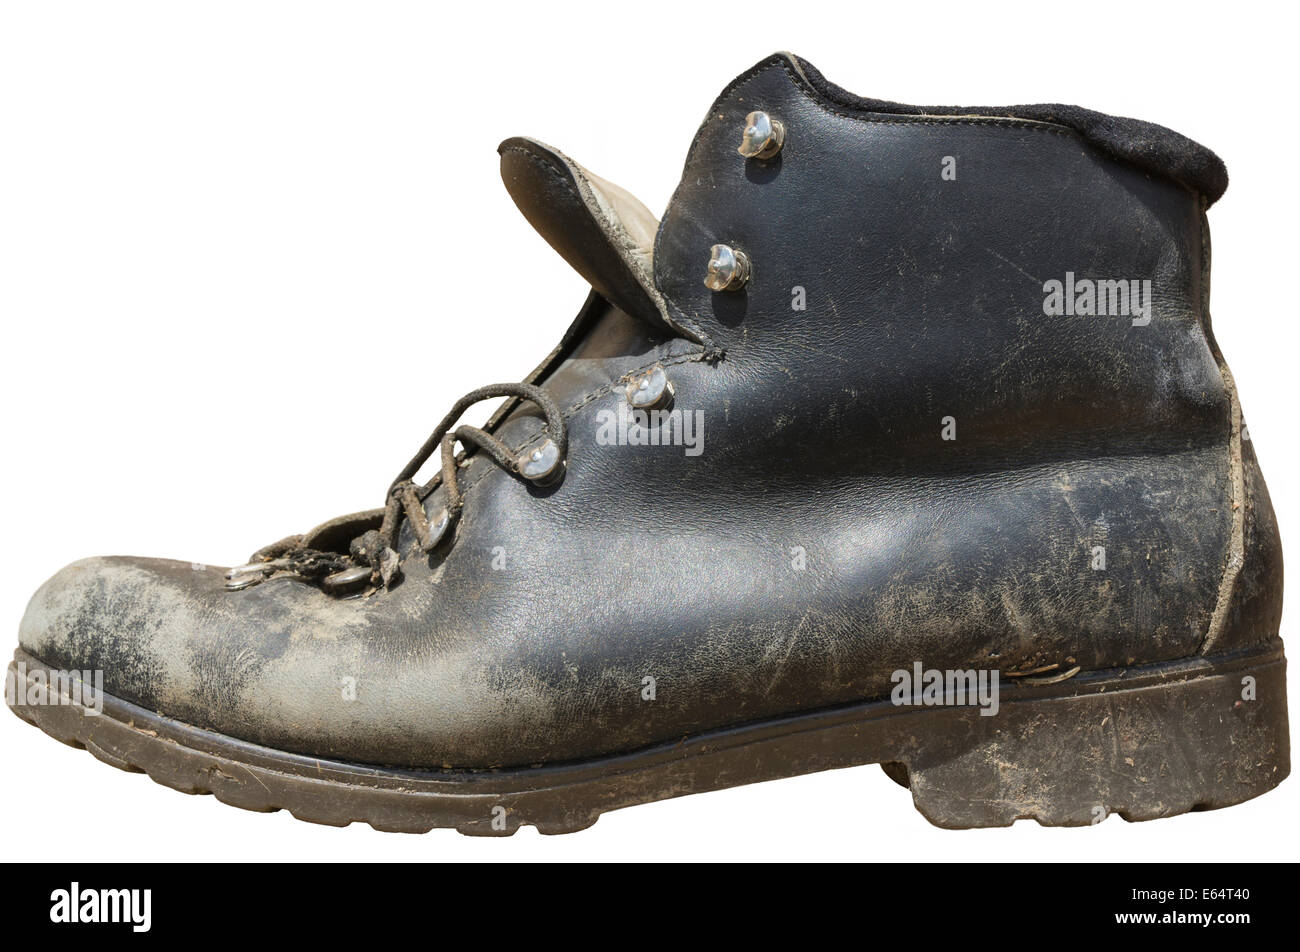 Isolated old hiking boot on white background Stock Photo